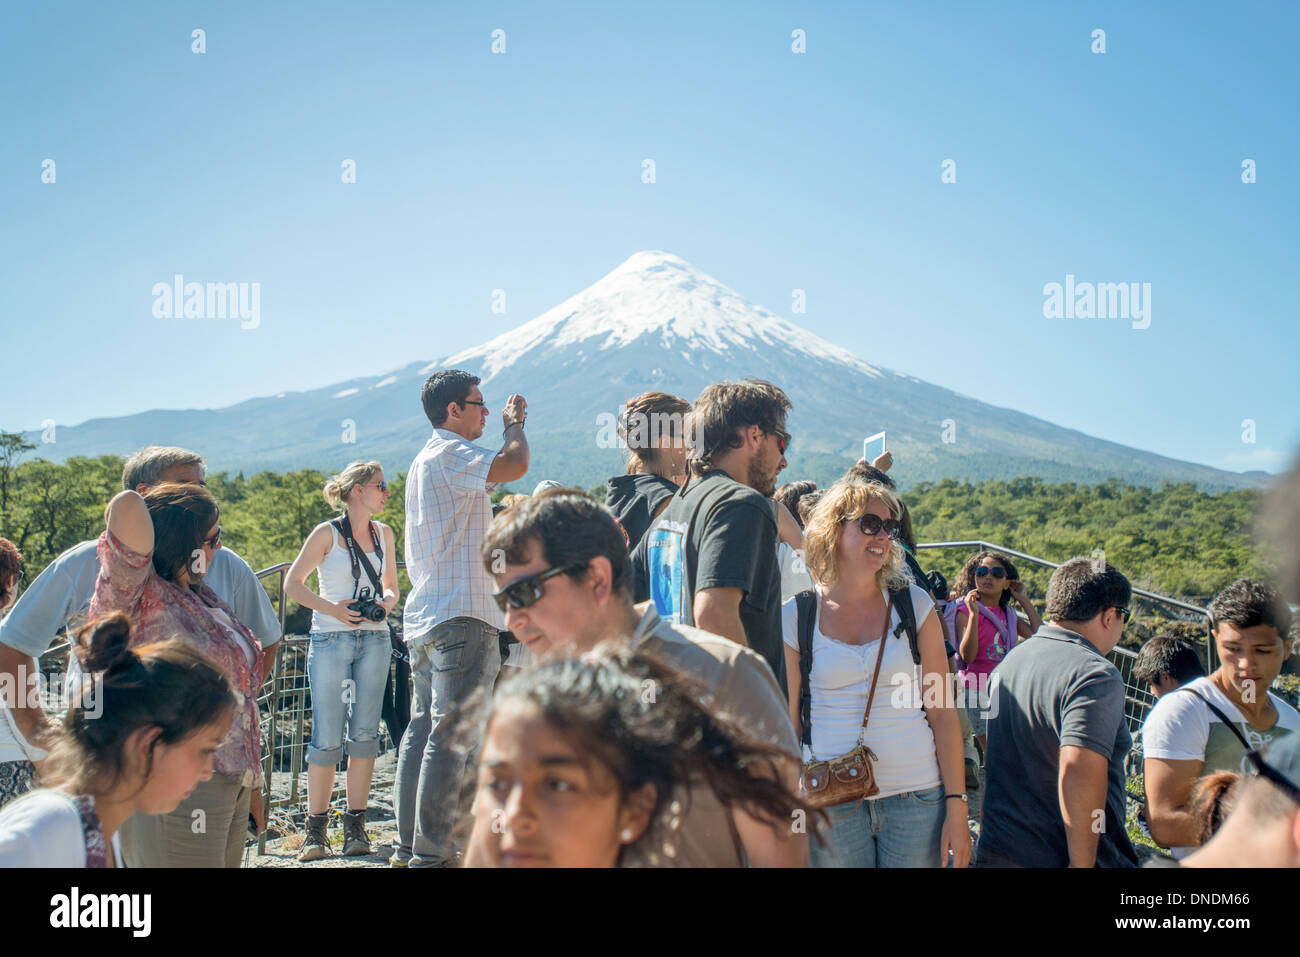 Tourists Observing Mountain in Chile Stock Photo